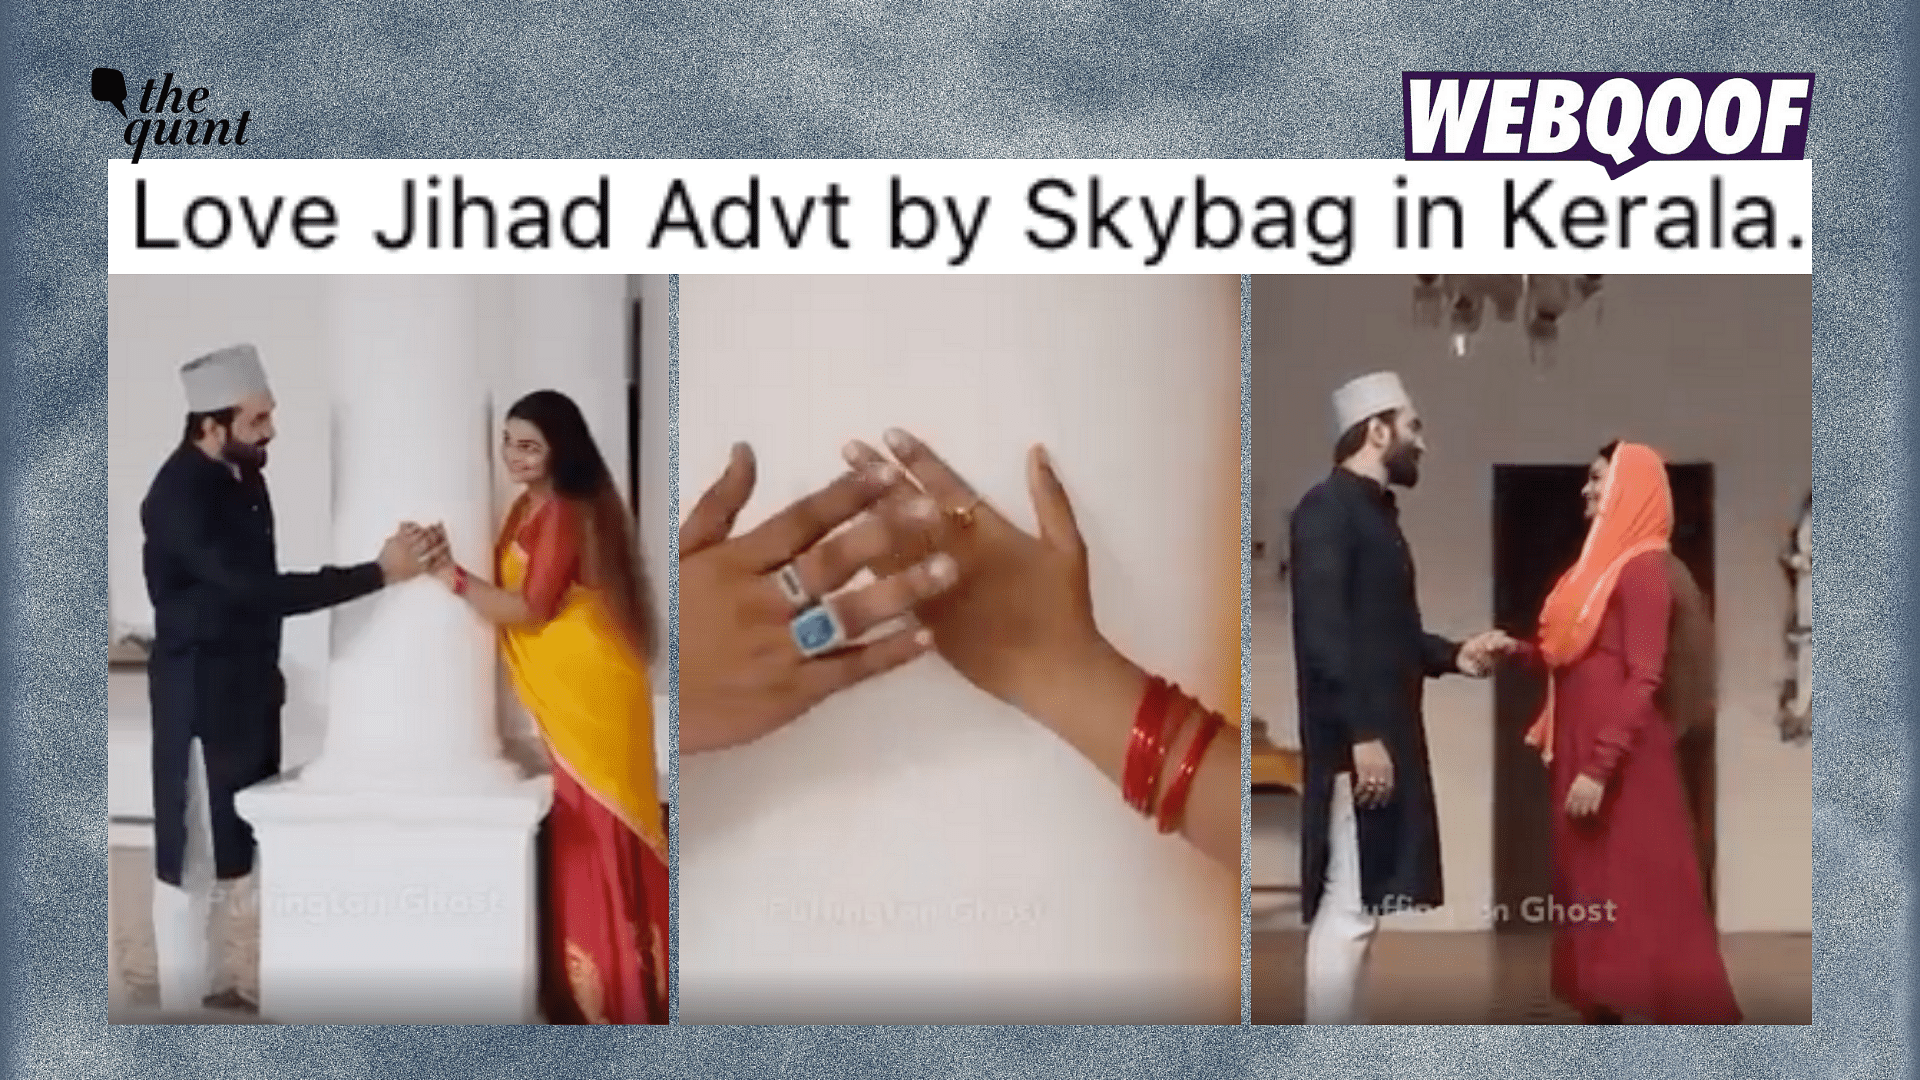 Fact-Check | No, This Is Not a Video of Vip's Skybags Advertisement  Promoting 'Love Jihad' in Kerala